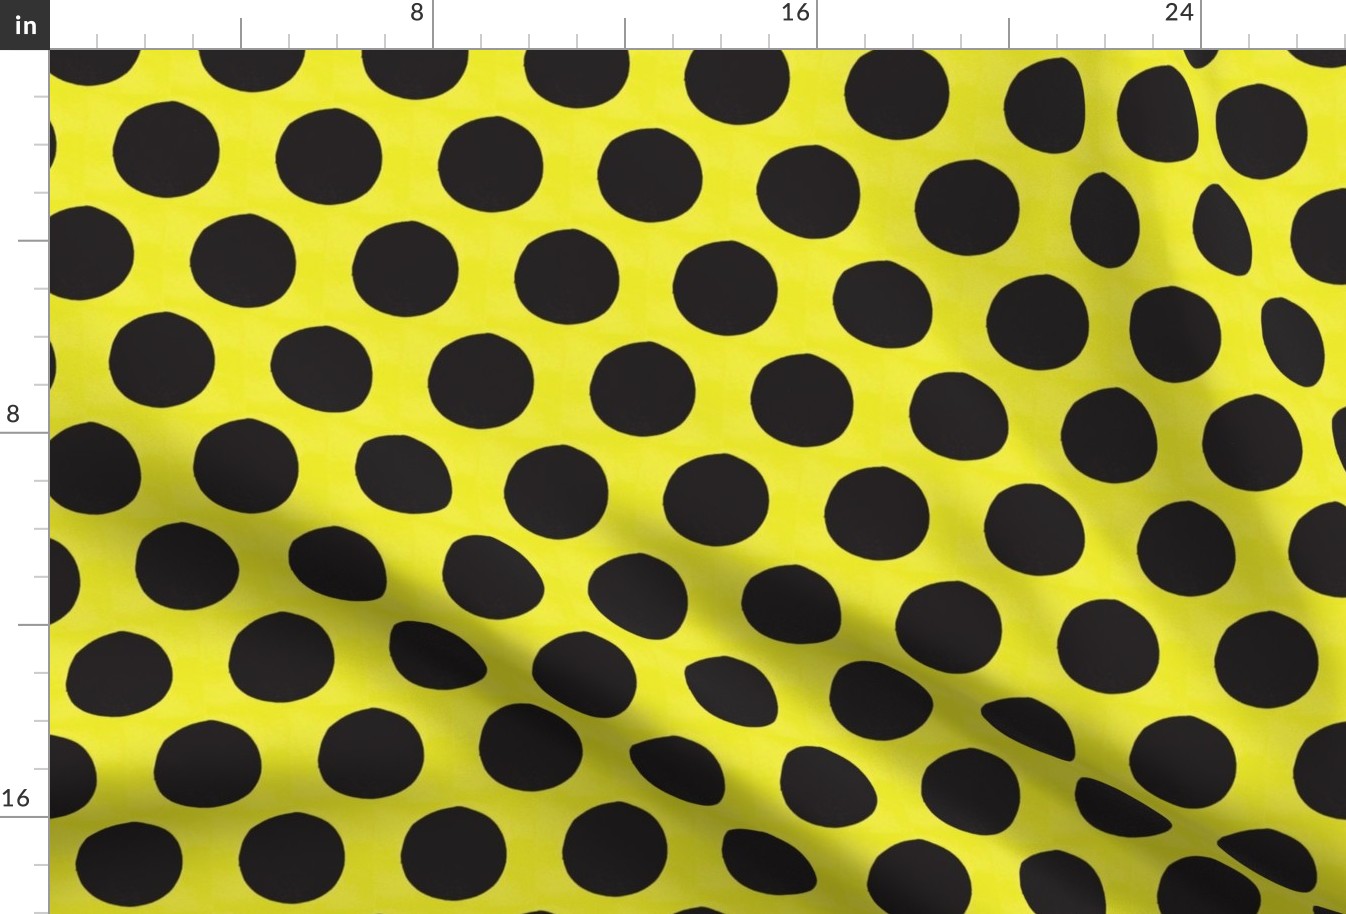 More...Polk-a-dots (in yellow)